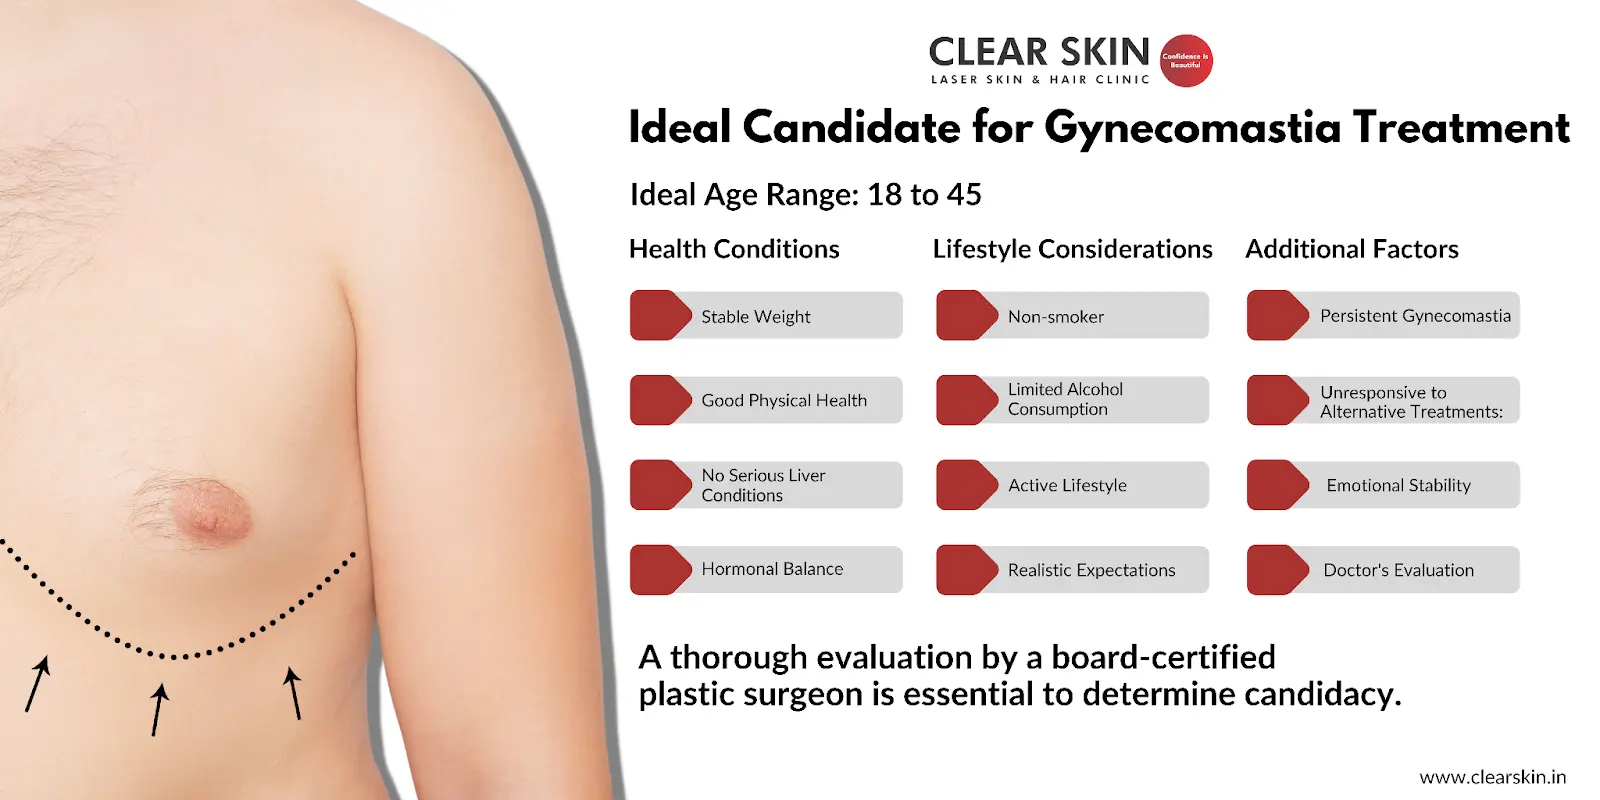 Ideal Candidate for Gynecomastia Treatment